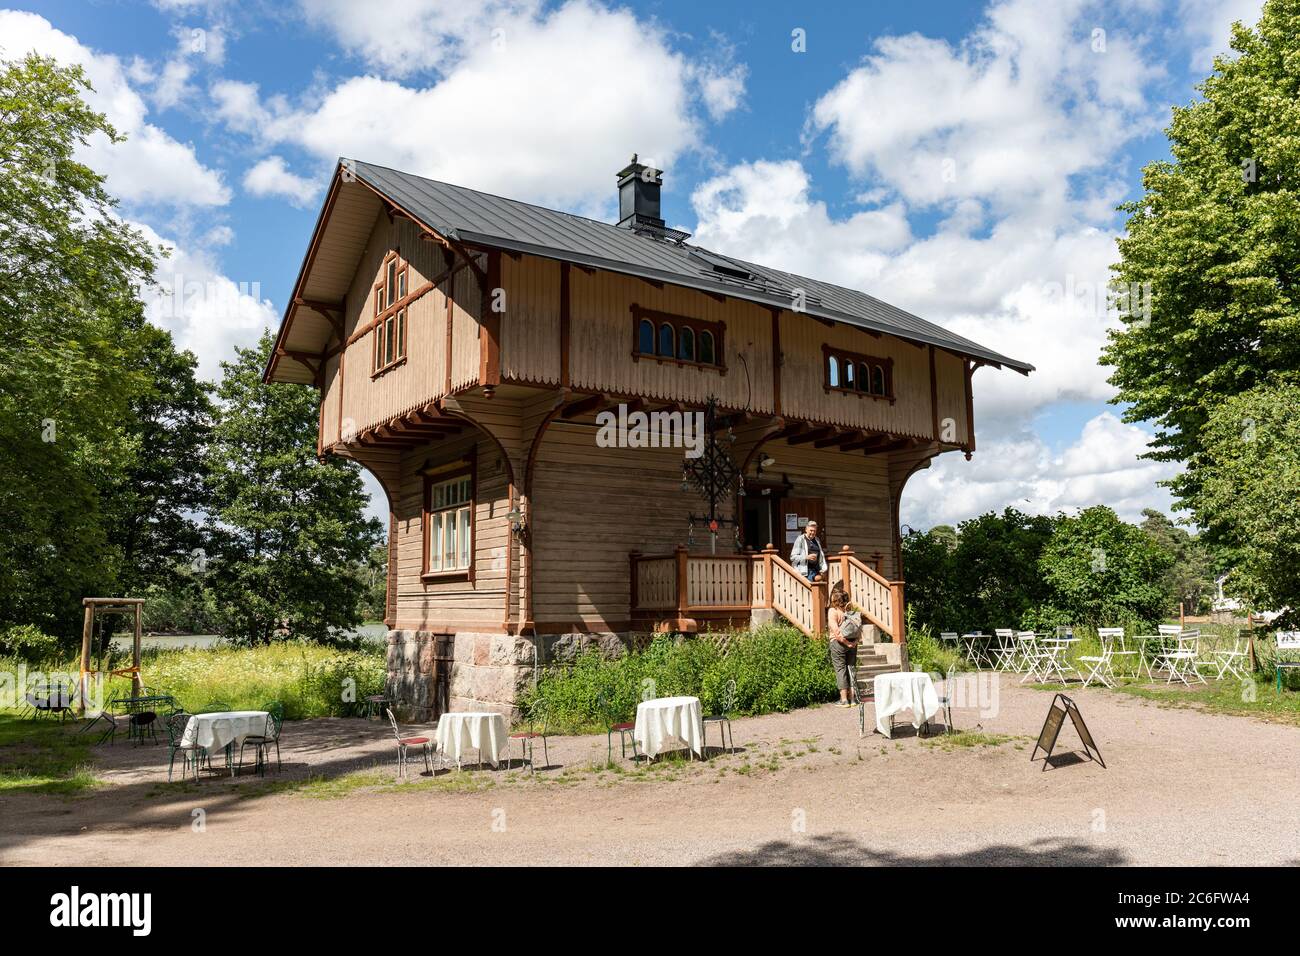 Old forest warden's house, now a café, in Seurasaari Open-Air Museum in Helsinki, Finland Stock Photo